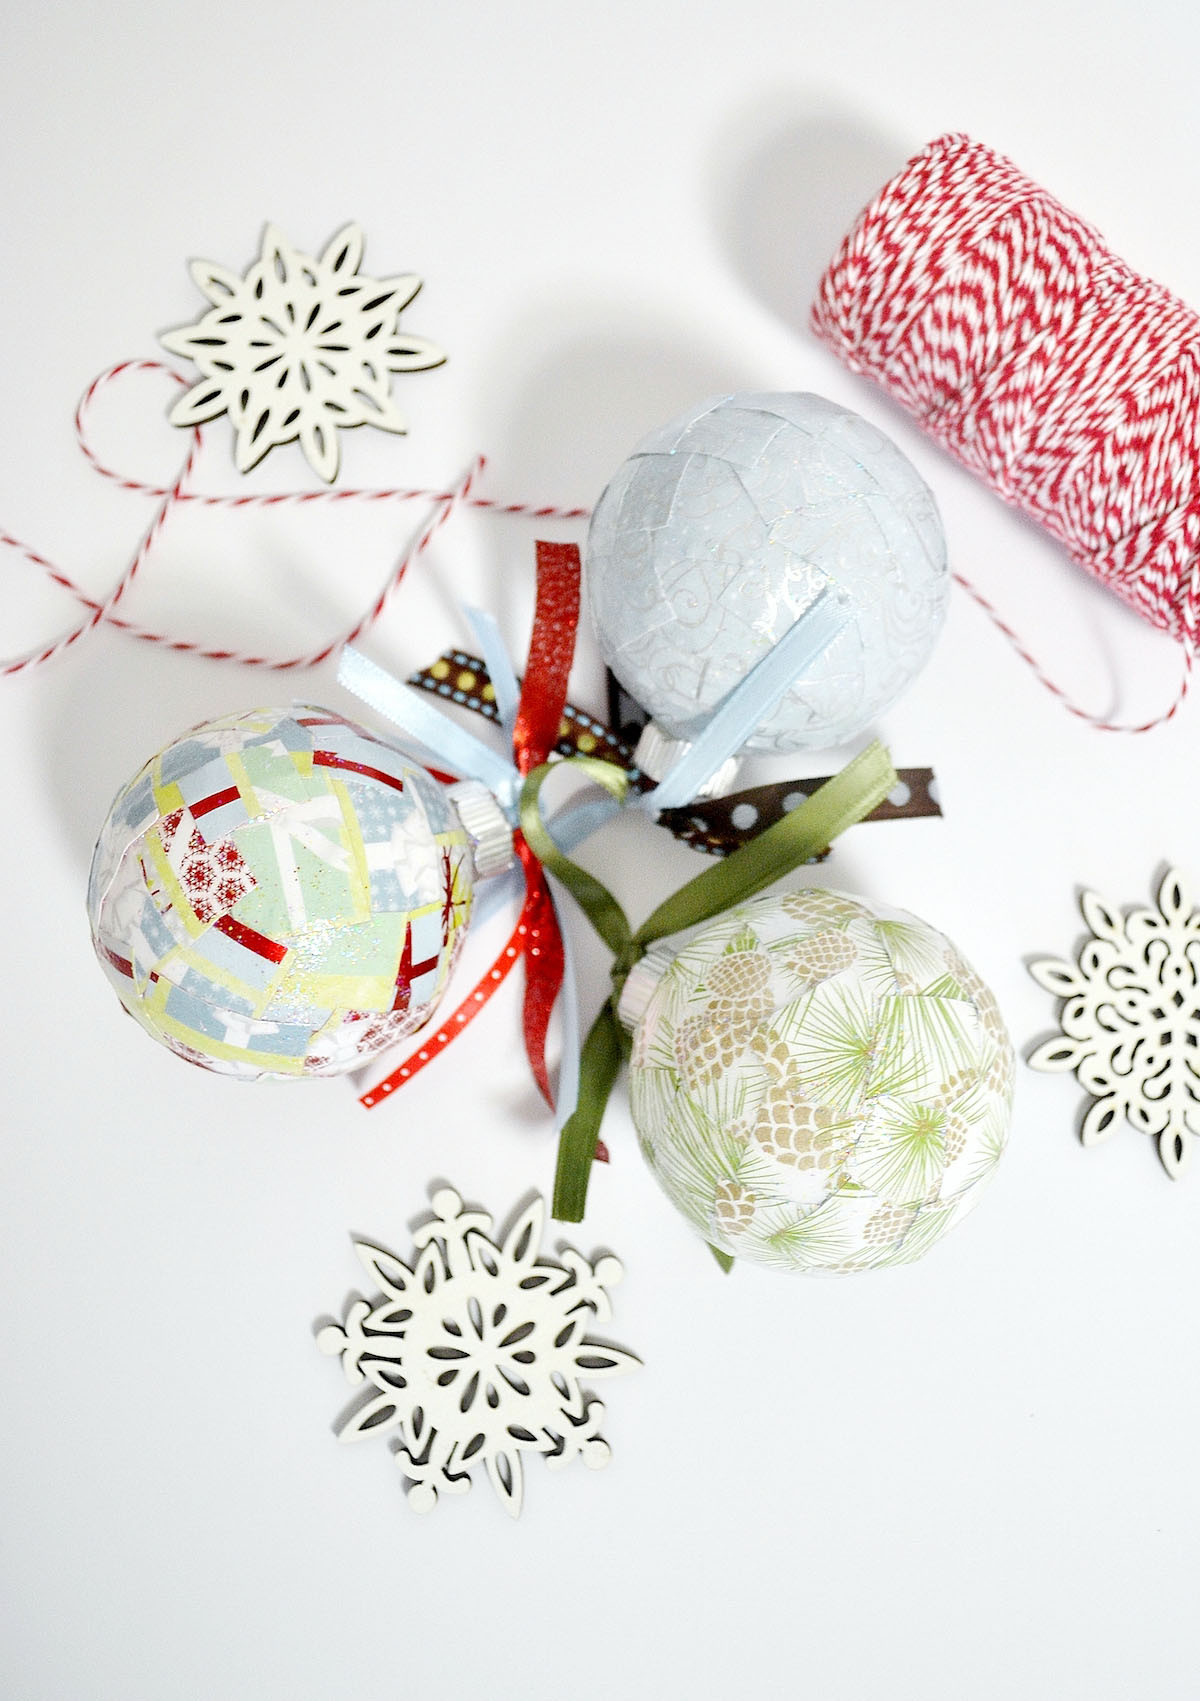 DIY Paper Christmas Ornaments
 50 DIY Paper Christmas Ornaments To Create With The Kids